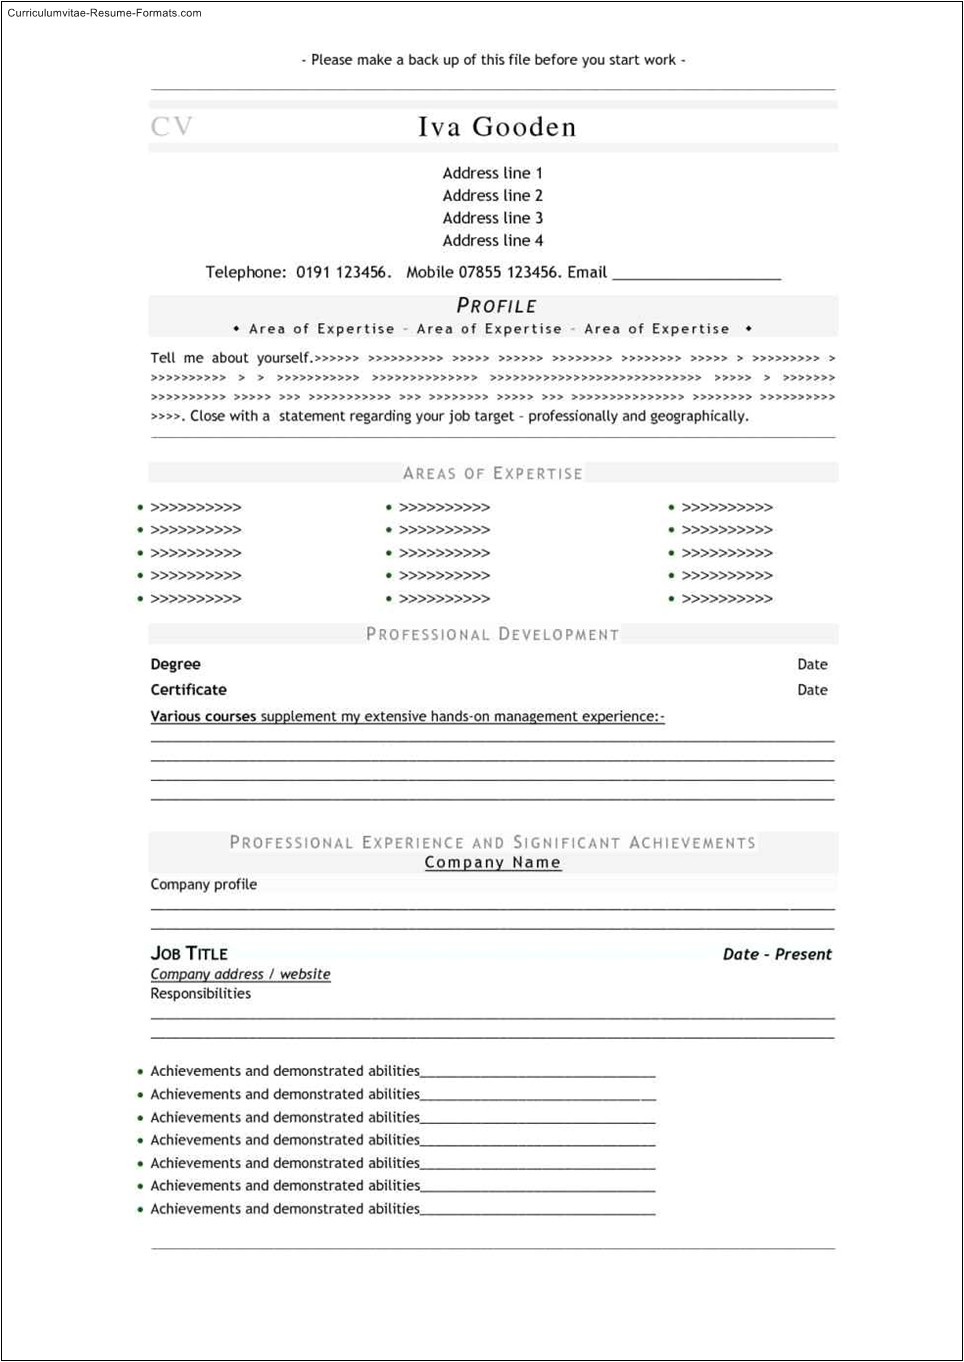 Free Professional Resume Templates Download Download Free Professional Resume Templates Free Samples